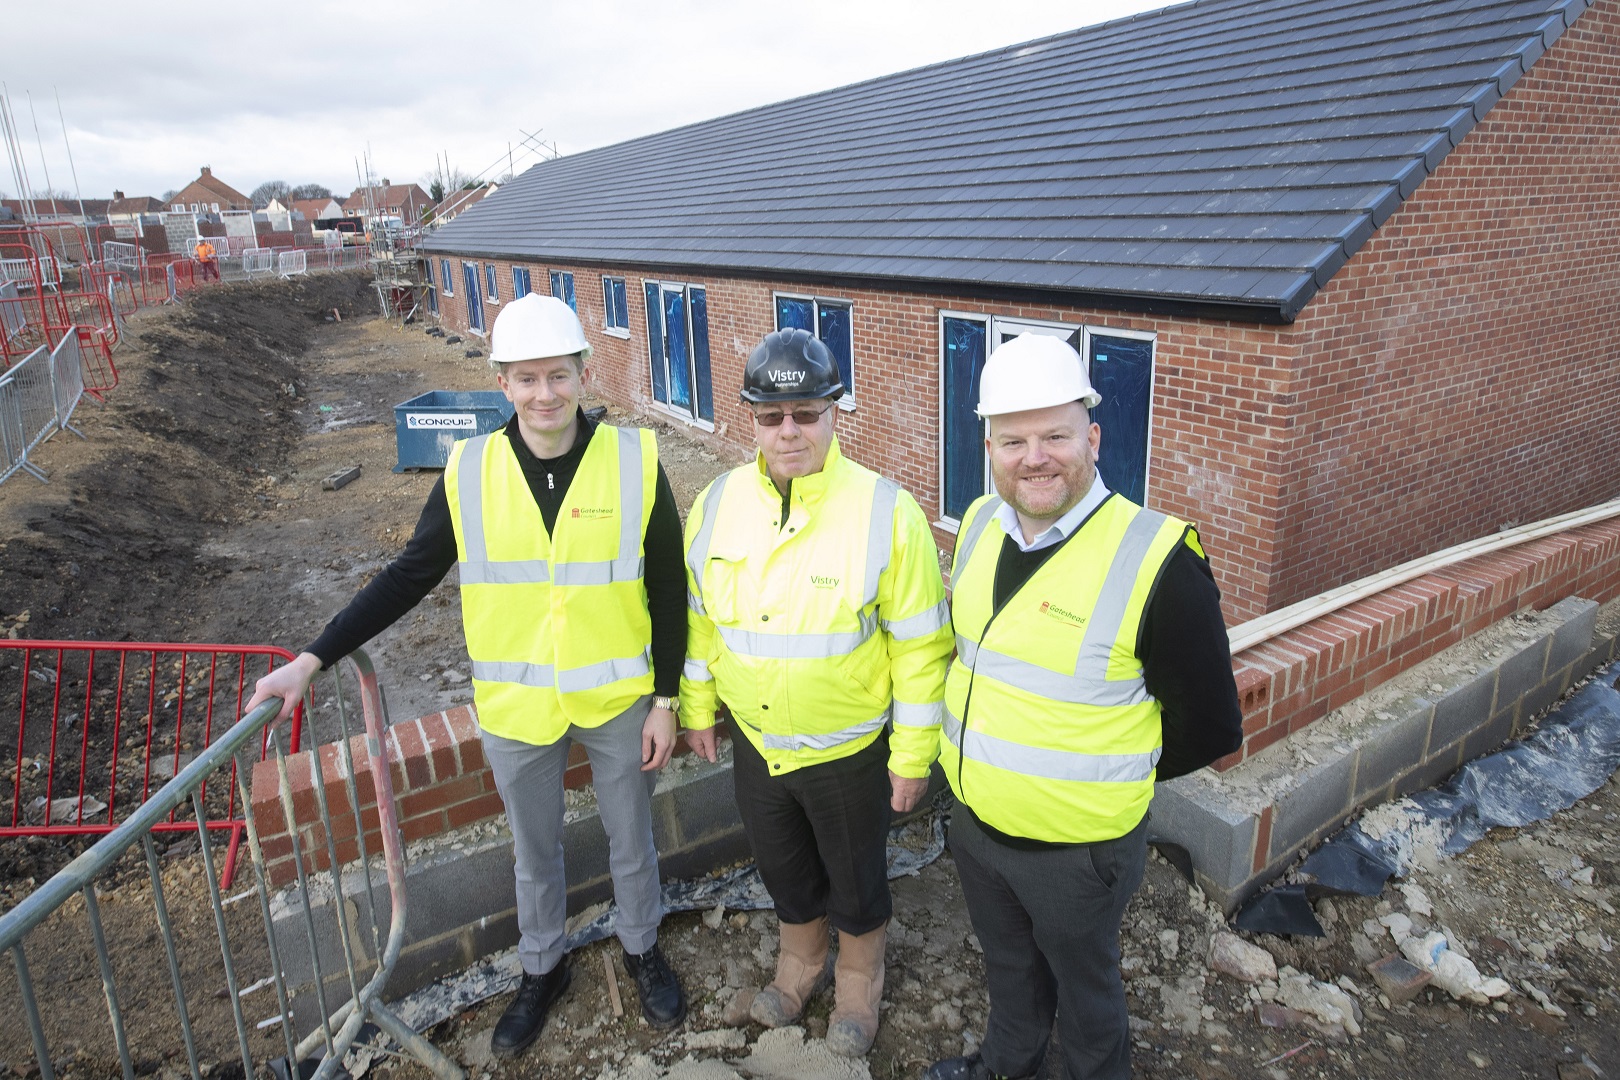 Three people in hi-vis vests and hard hats stood in front of housing development